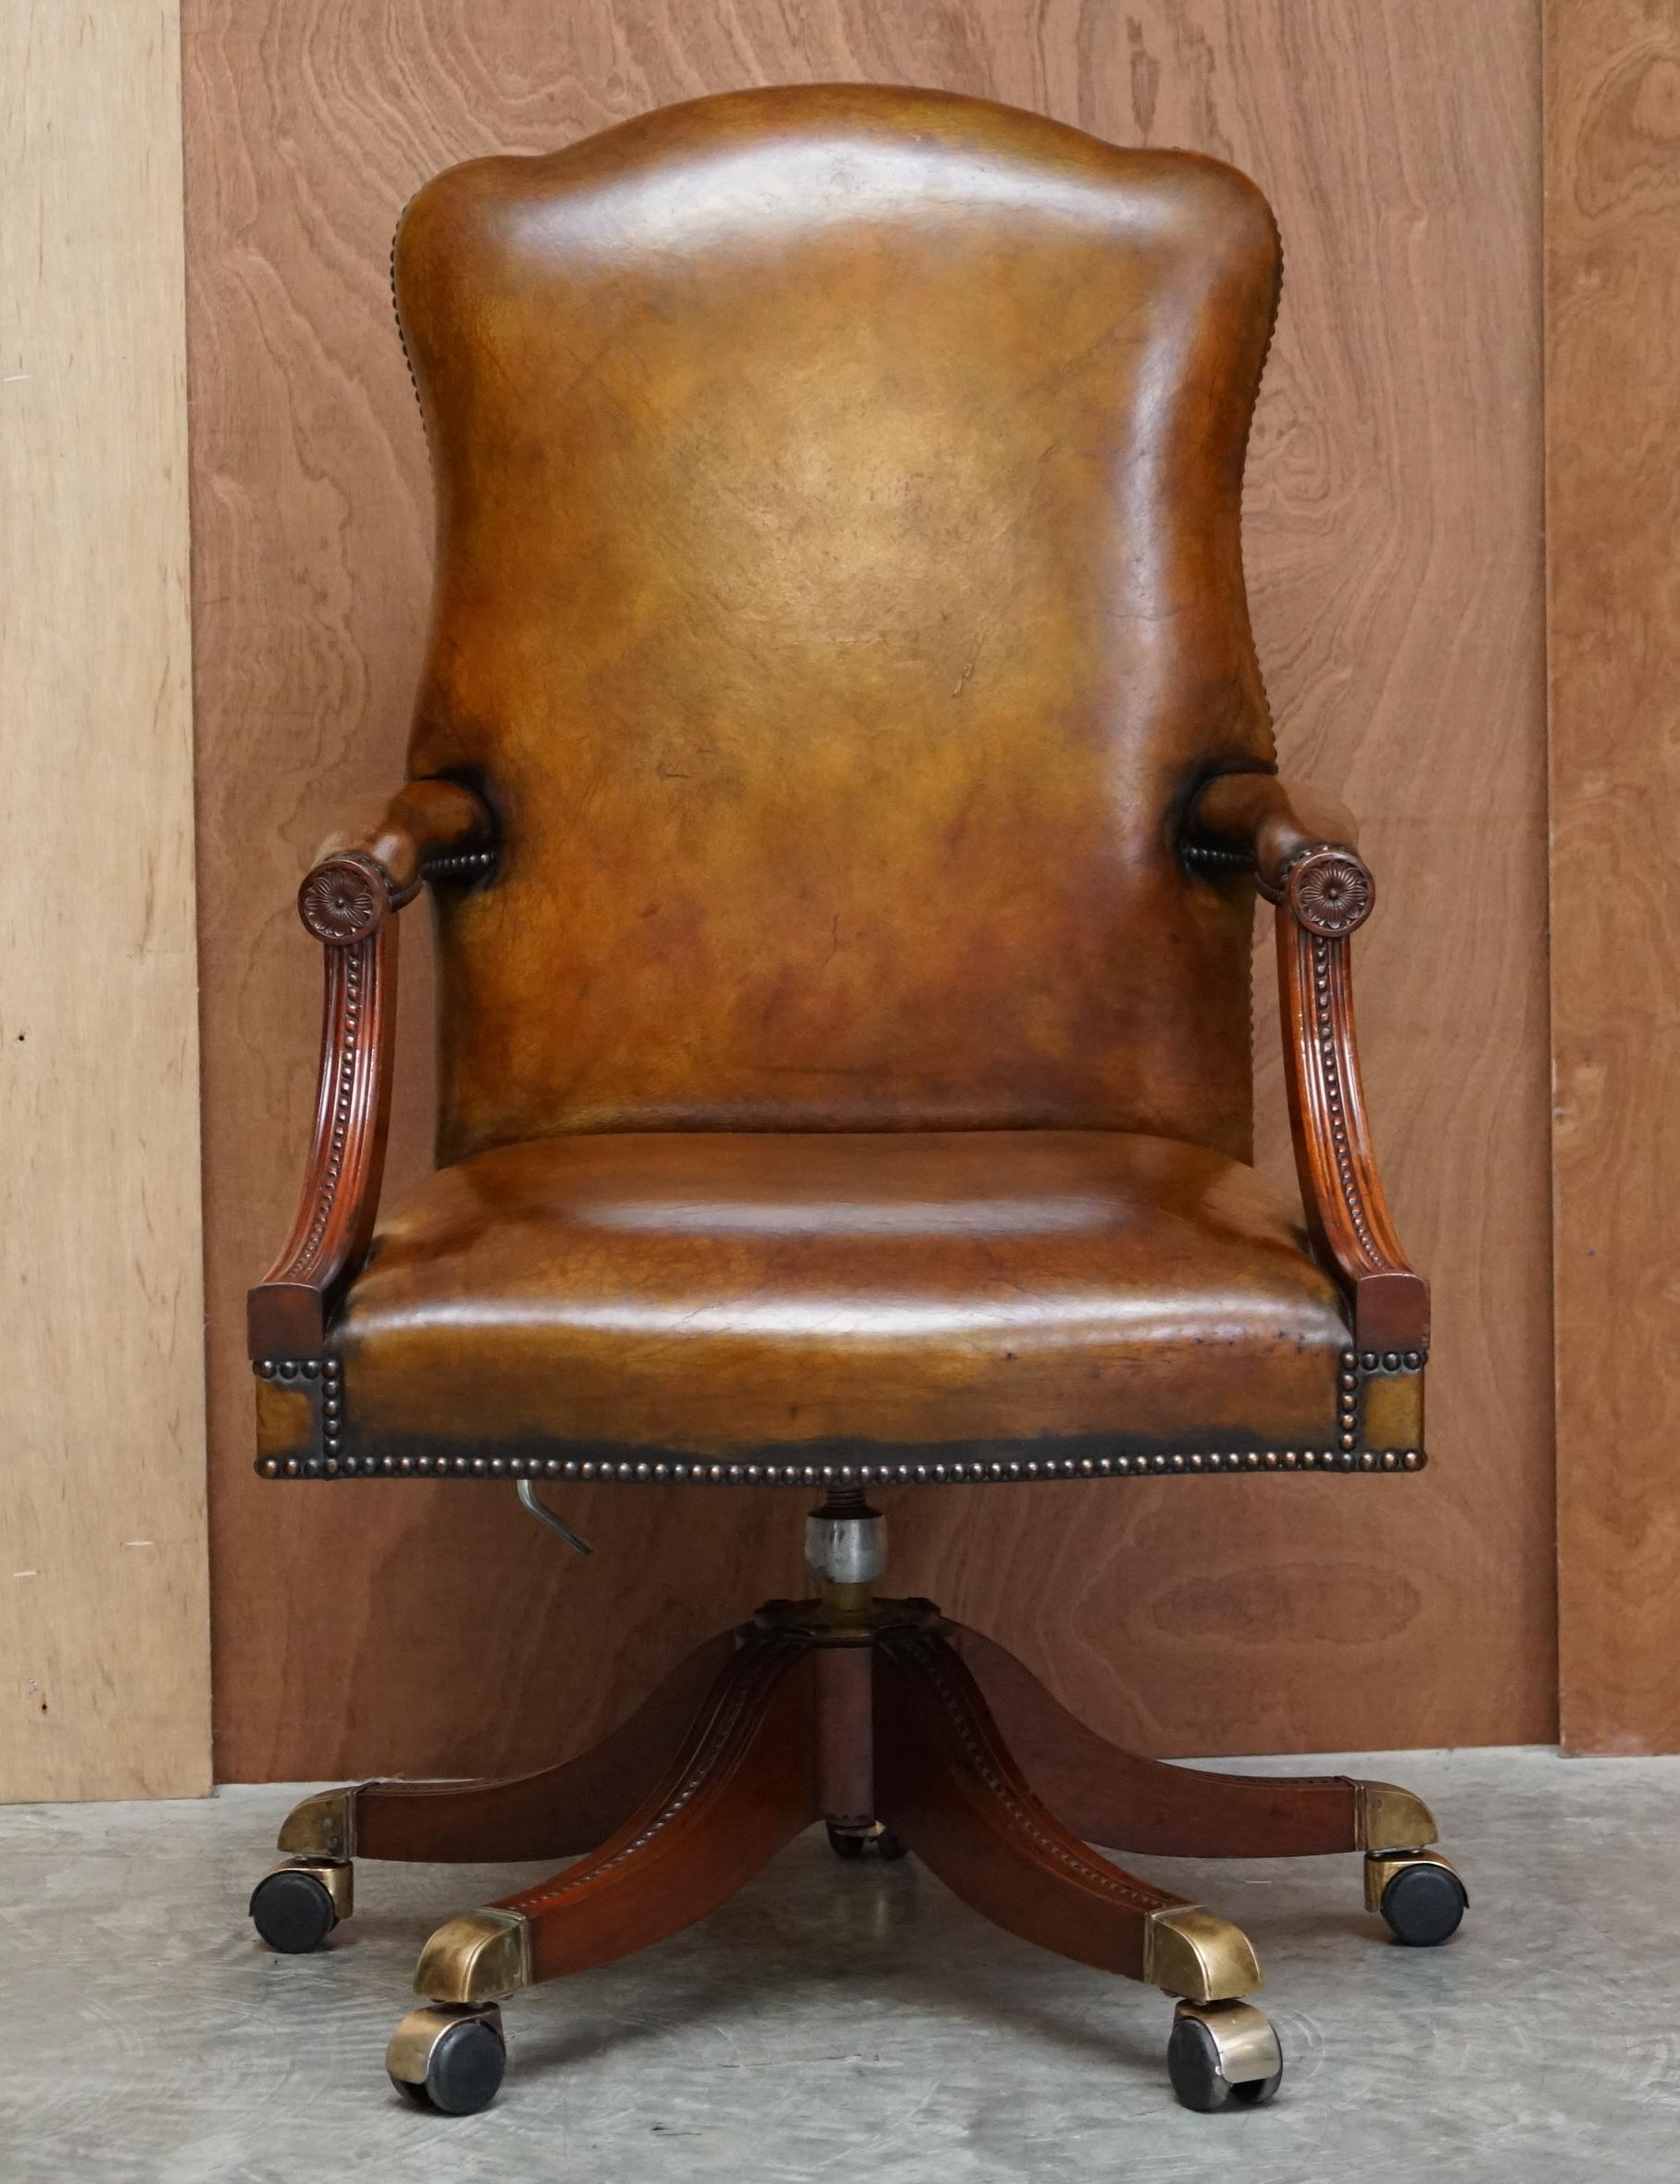 We are delighted to offer for sale this lovely fully restored original oak framed vintage hand dyed cigar brown leather directors chair.

Please note the delivery fee listed is just a guide, it covers within the M25 only for the UK and local